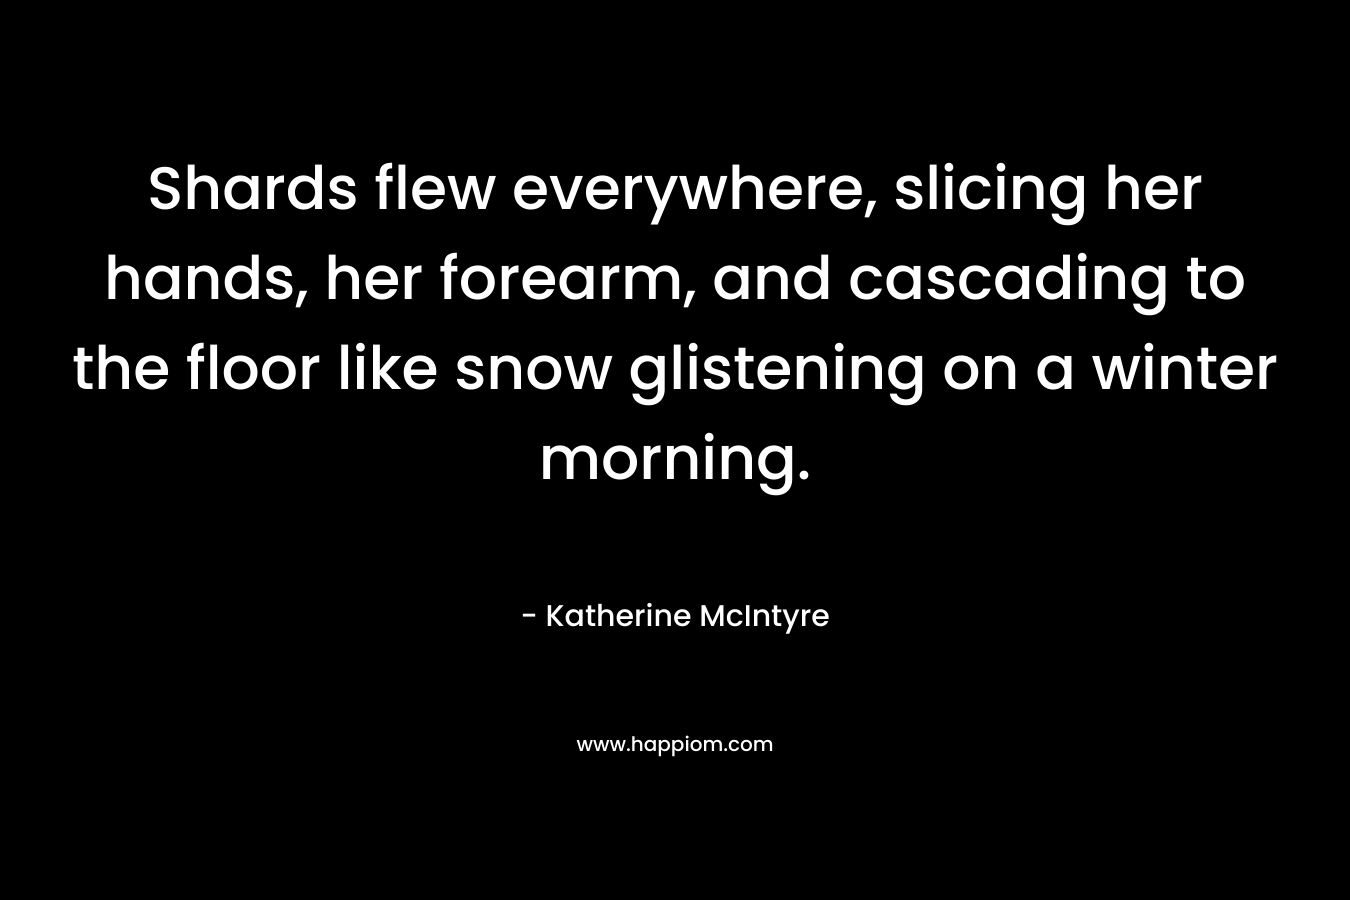 Shards flew everywhere, slicing her hands, her forearm, and cascading to the floor like snow glistening on a winter morning. – Katherine McIntyre